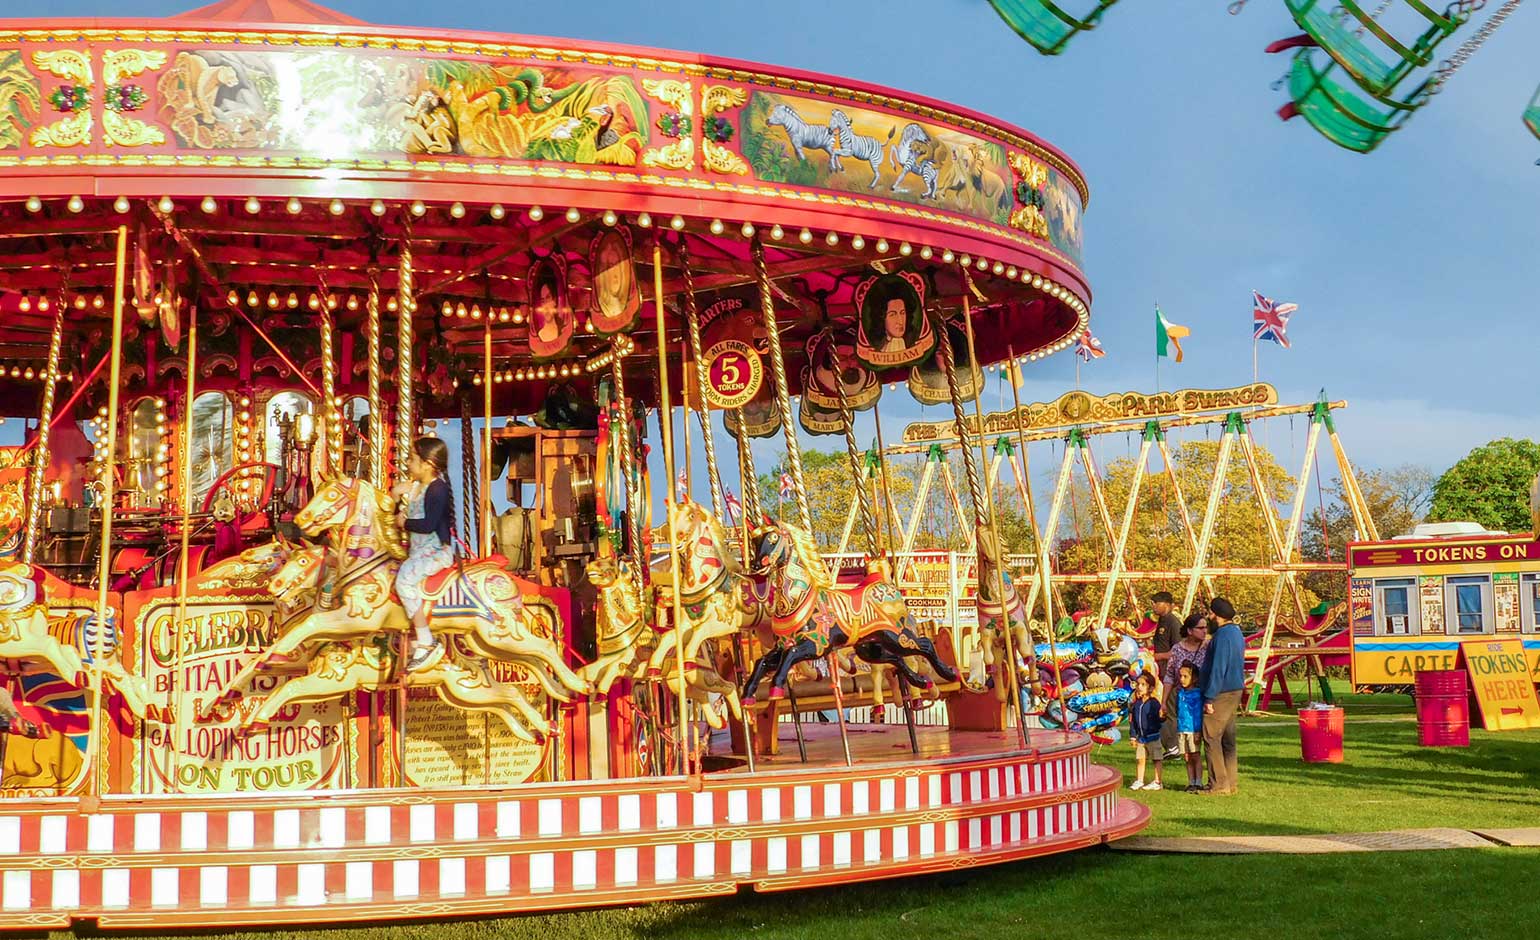 Residents encouraged to get creative at the Carters Steam Fair in Bath